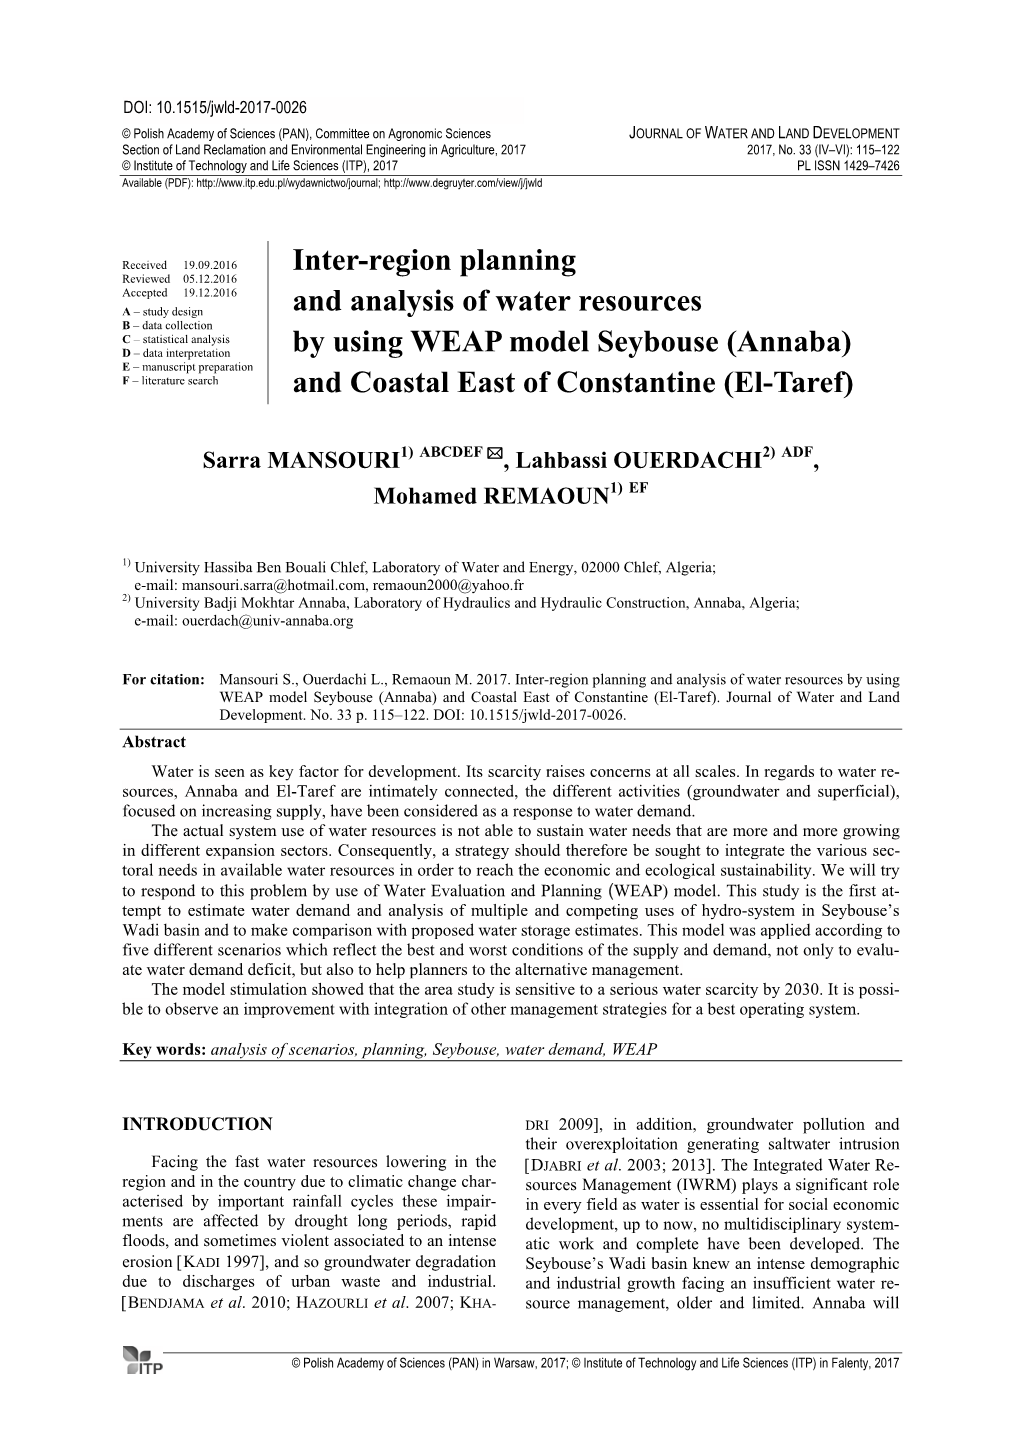 Inter-Region Planning and Analysis of Water Resources by Using WEAP Model Seybouse (Annaba) and Coastal East of Constantine (El-Taref)